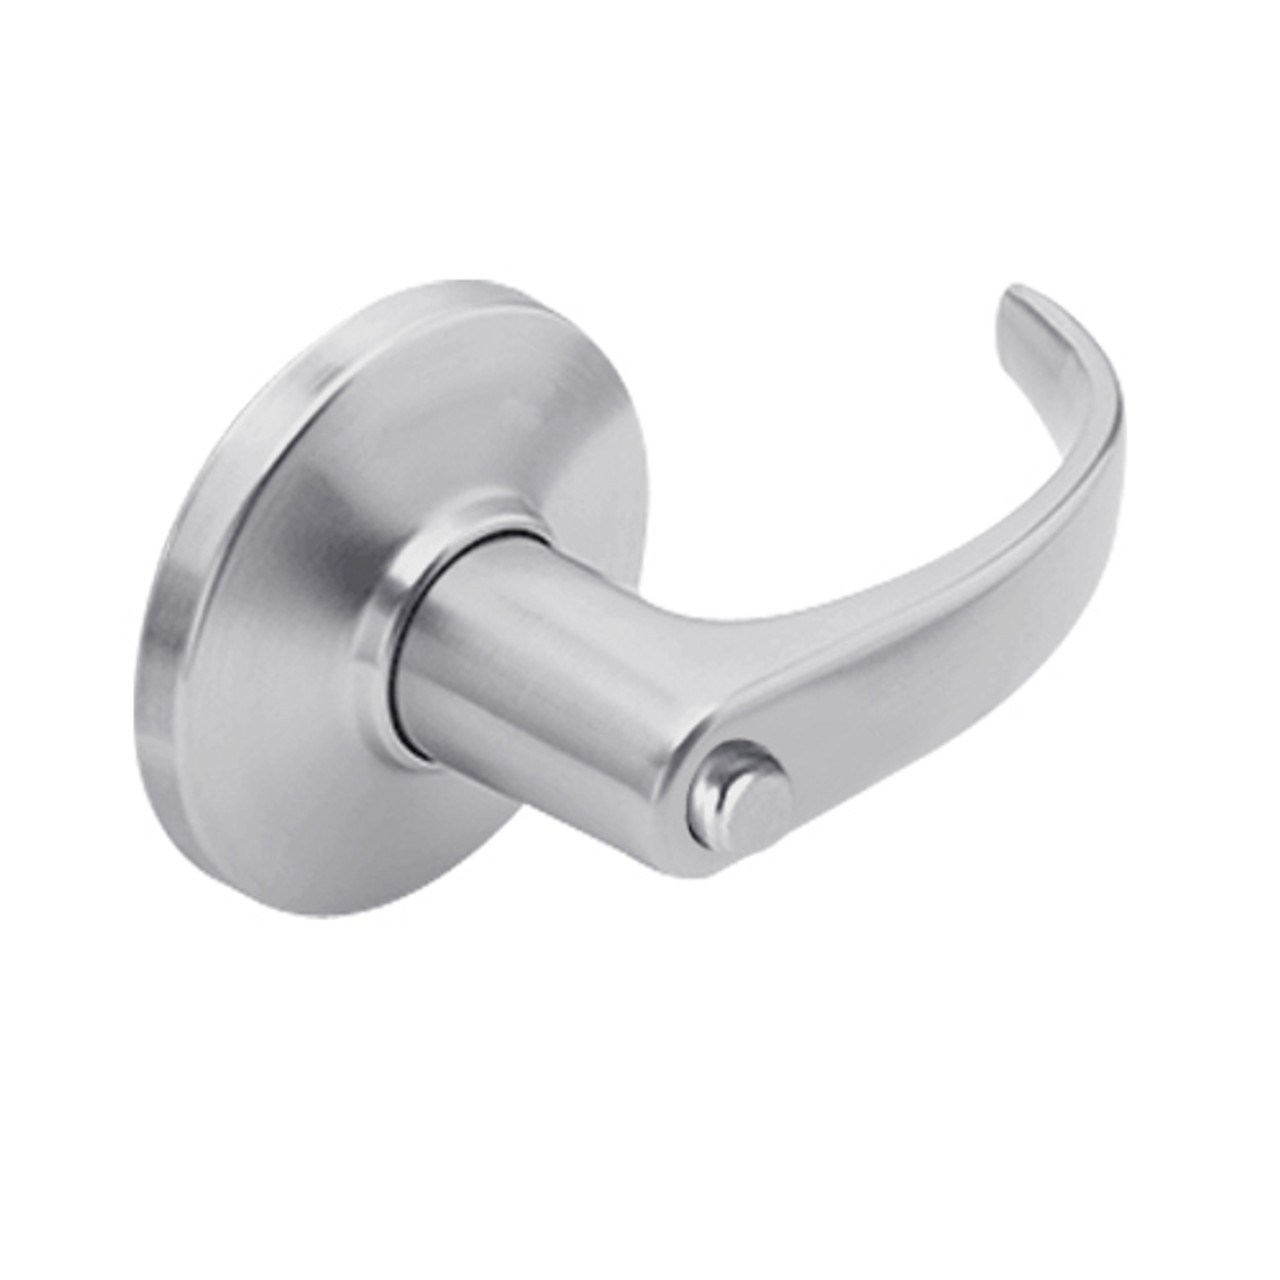 9K30LL14DS3626 Best 9K Series Hospital Privacy Heavy Duty Cylindrical Lever Locks in Satin Chrome